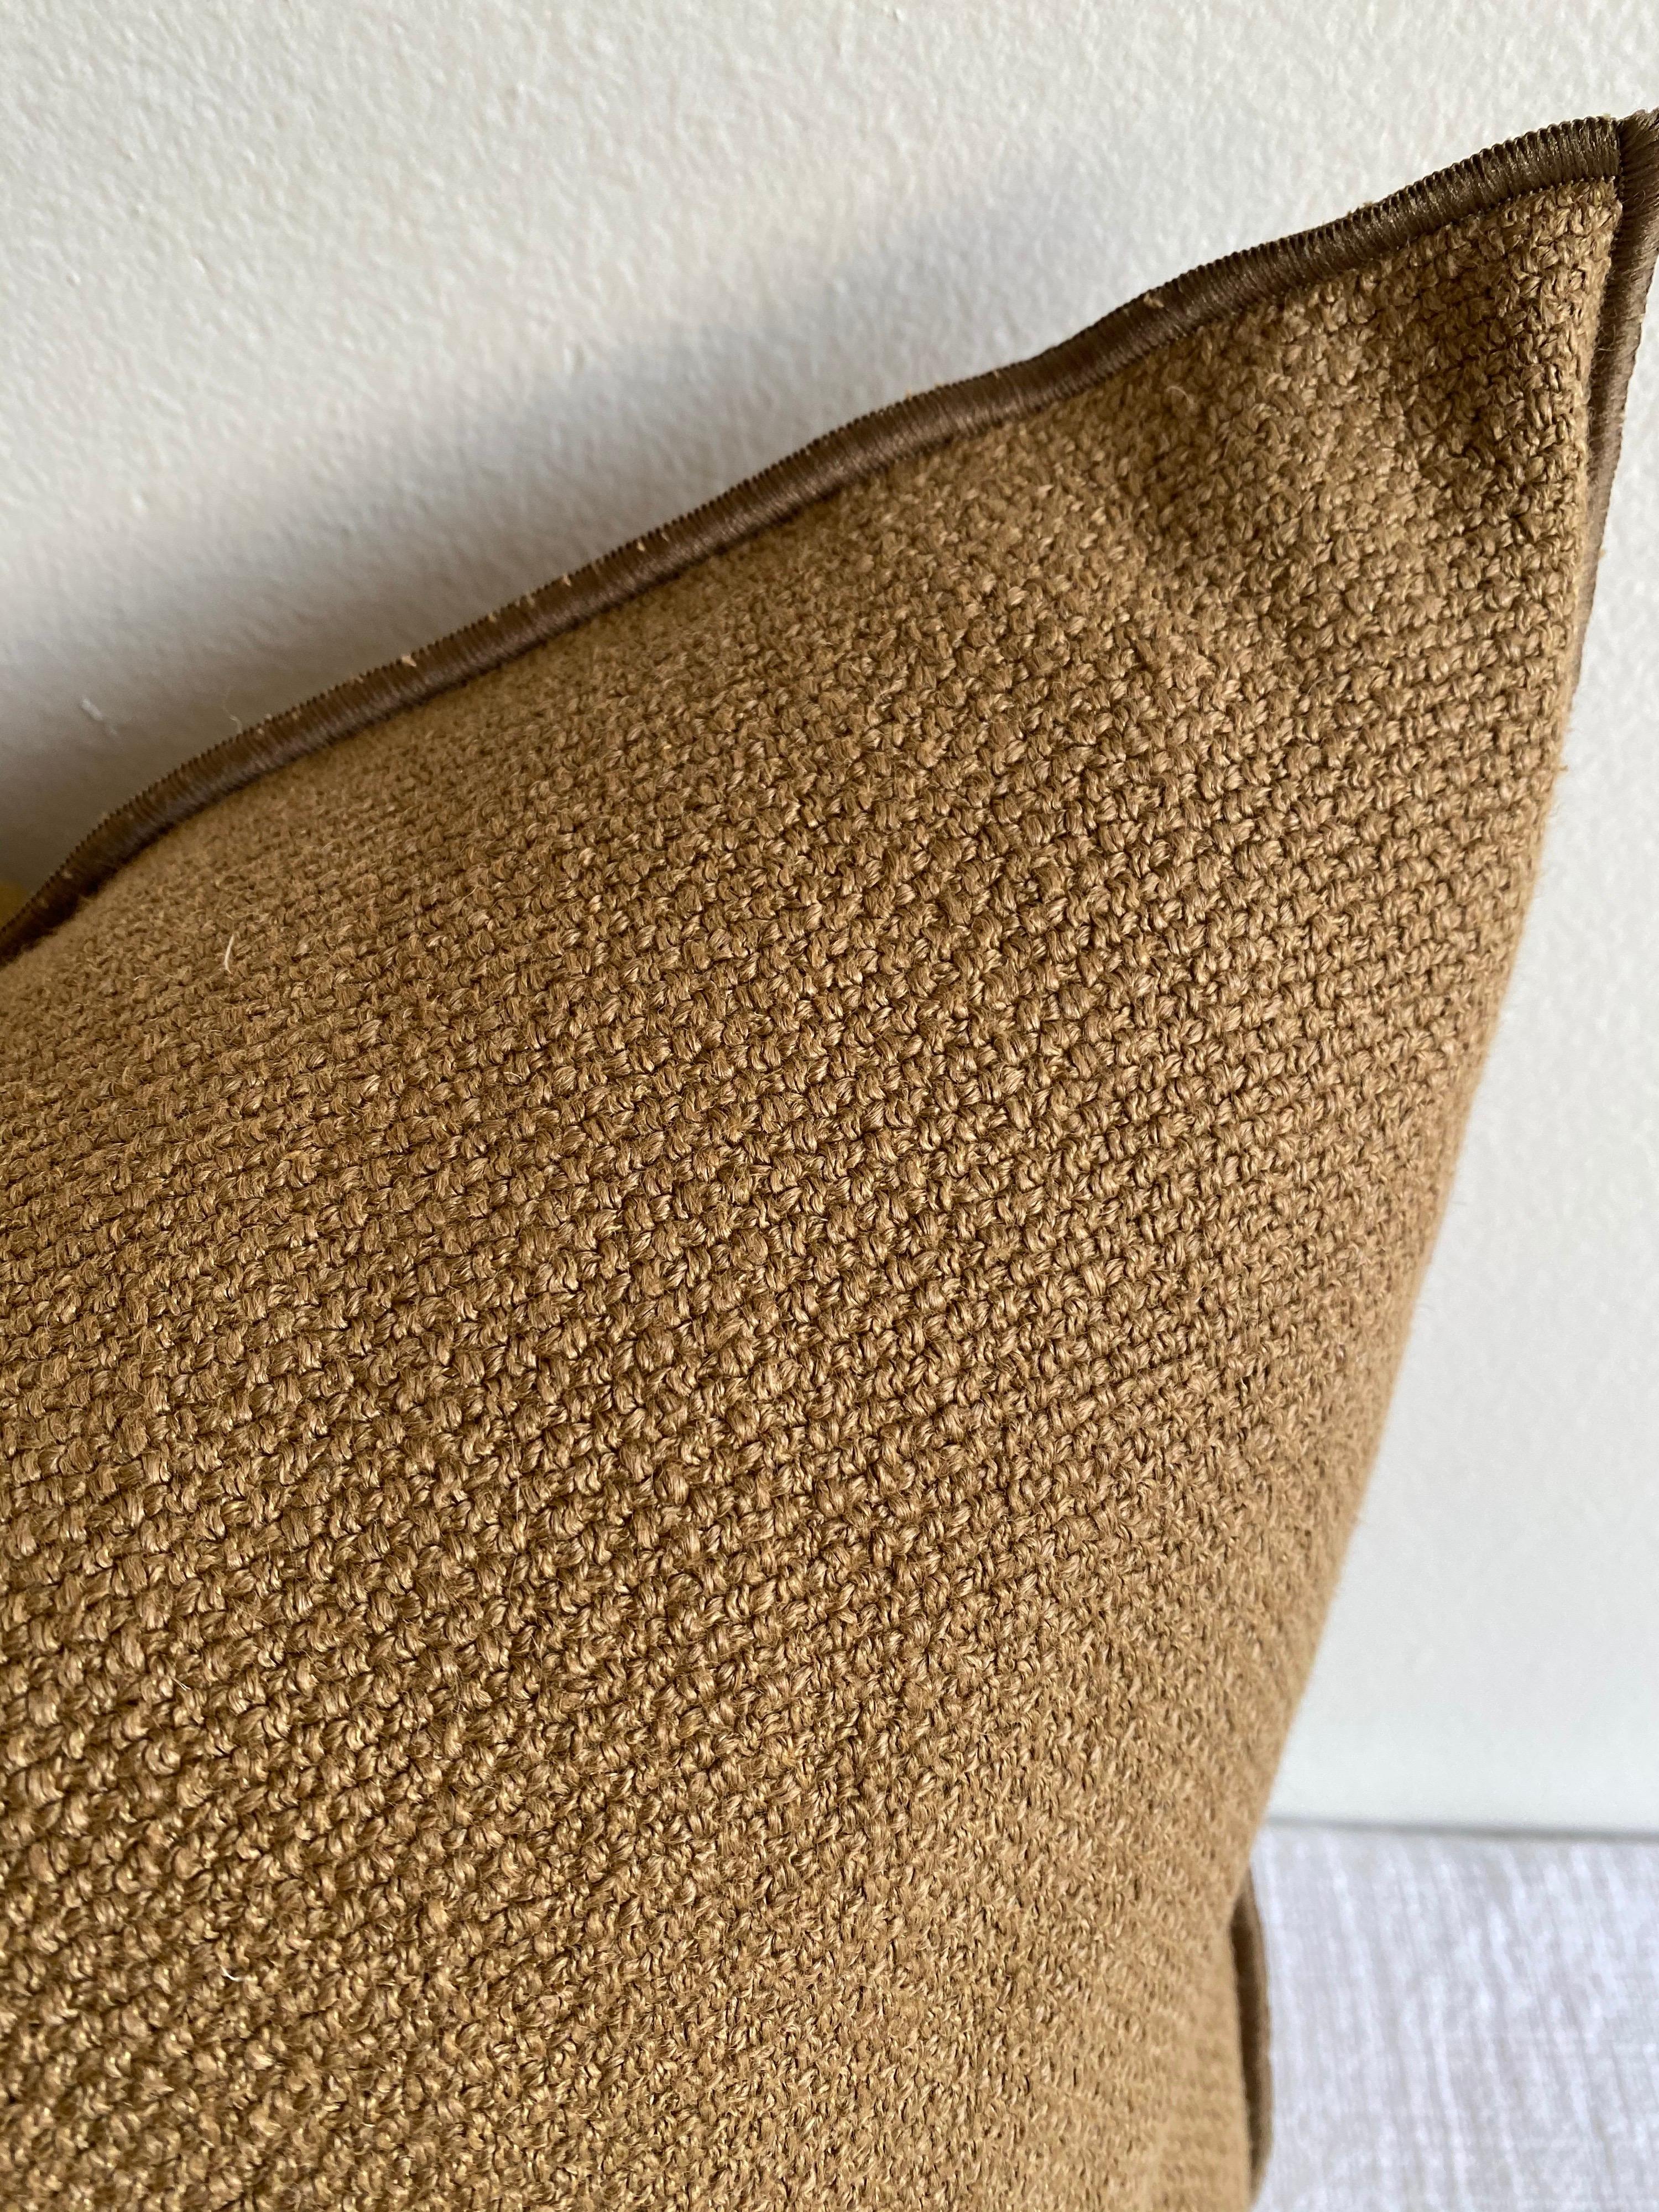 Custom linen blend accent pillow with down insert
Color: Cappucino
A pretty copper/brown colored nubby style pillow with a stitched edge, metal zipper closure.
Size 20